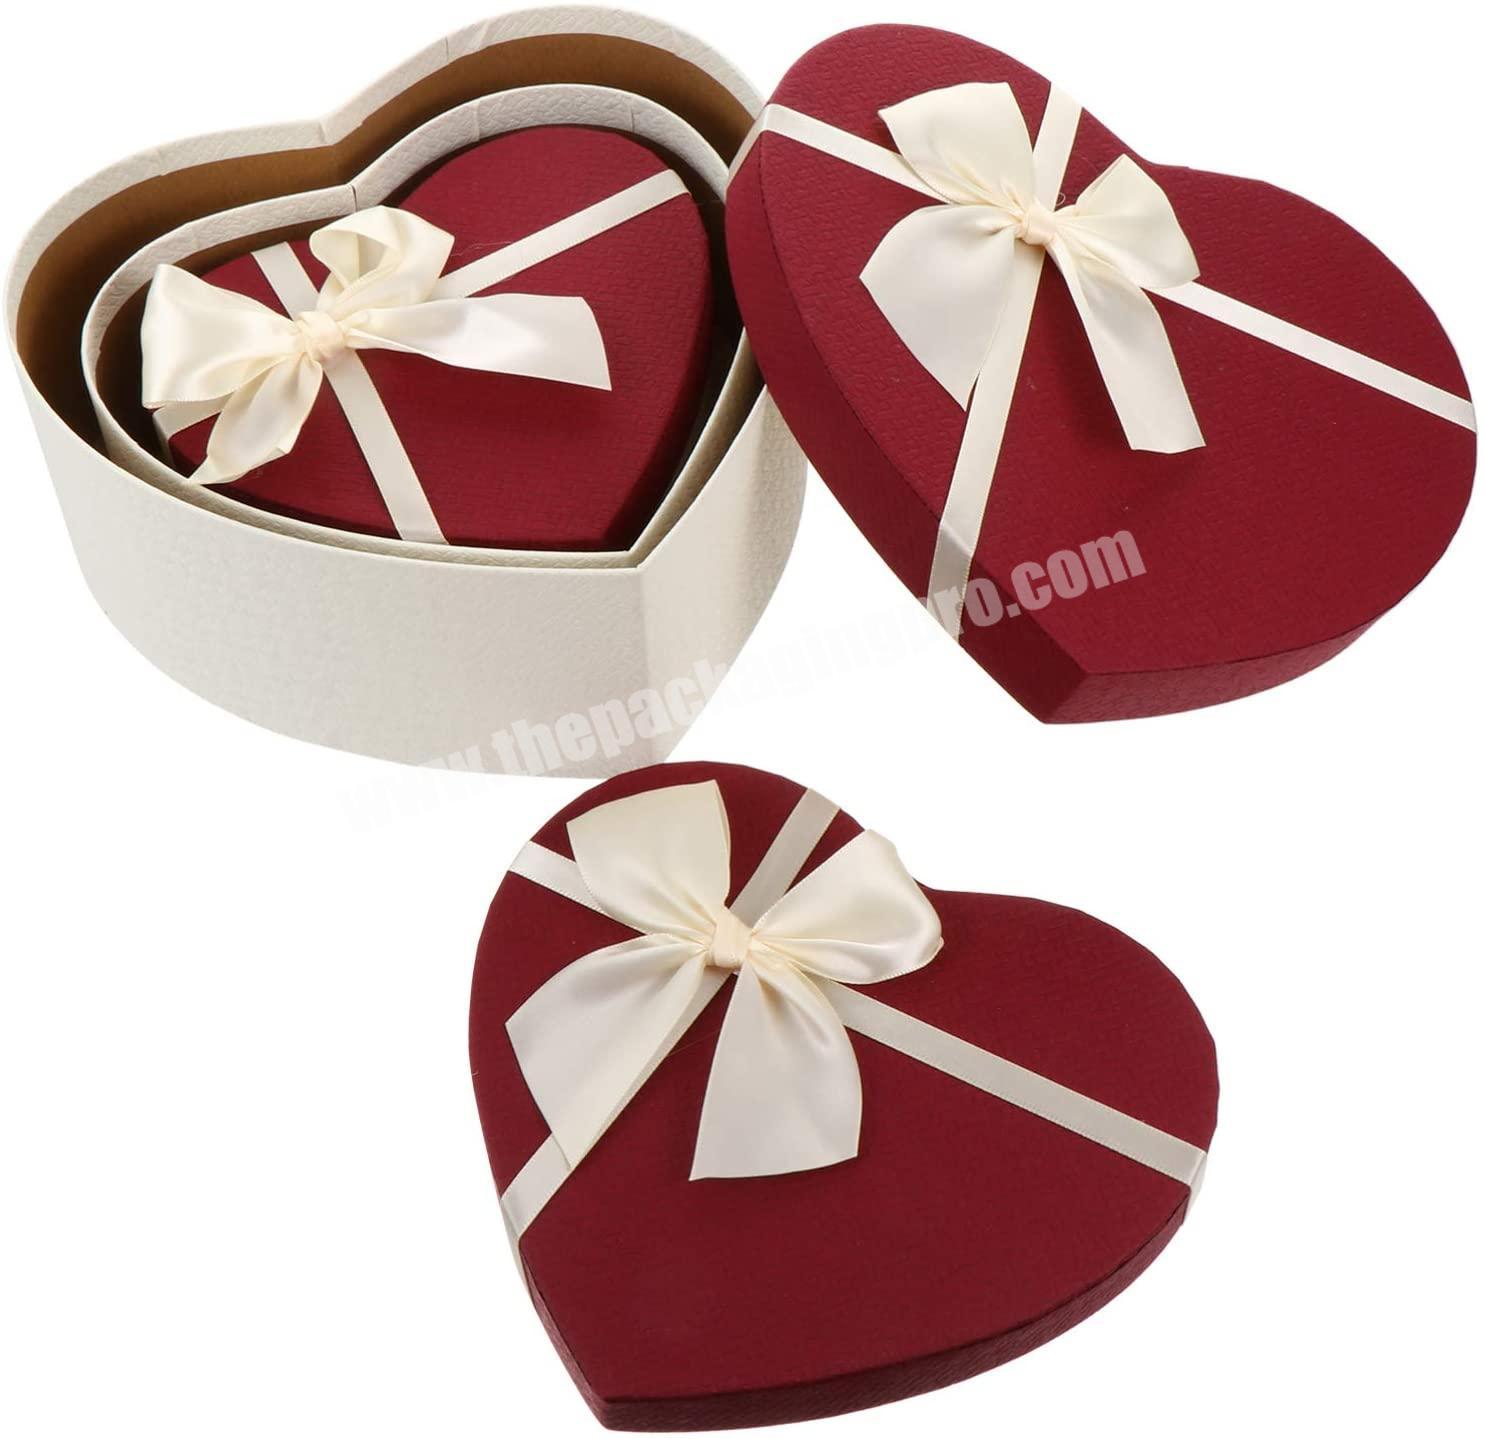 Luxury Cardboard Heart Shaped Gift Box Birthday Gifts Flower Gifts Packaging Box With Heart Cover